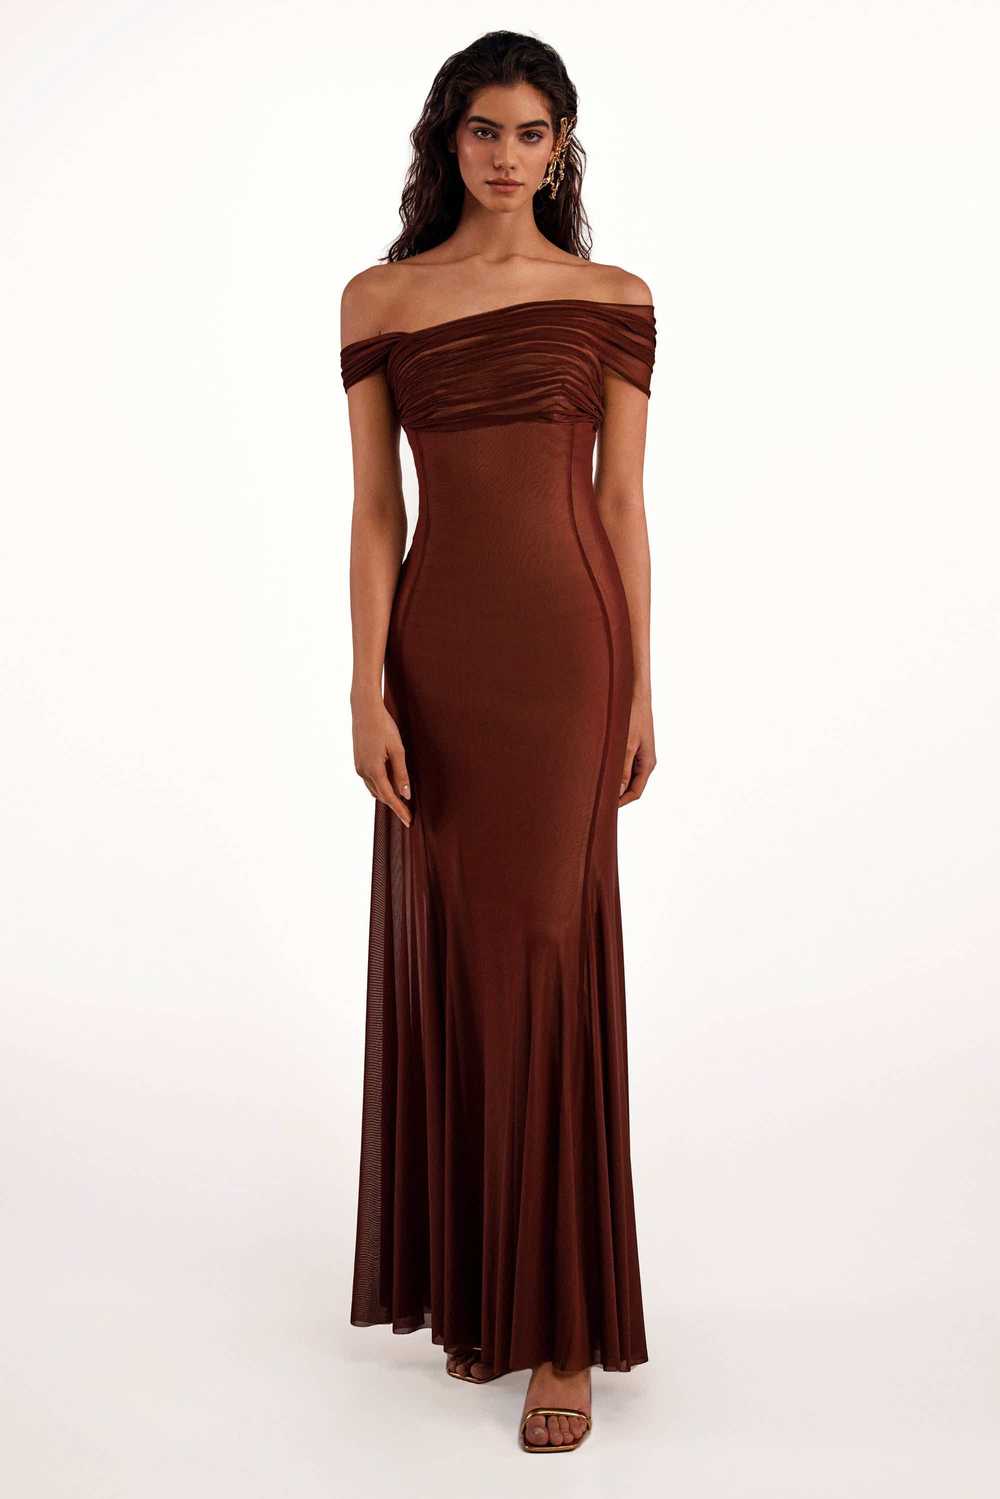 Milla Second-skin maxi dress in chocolate color - image 2